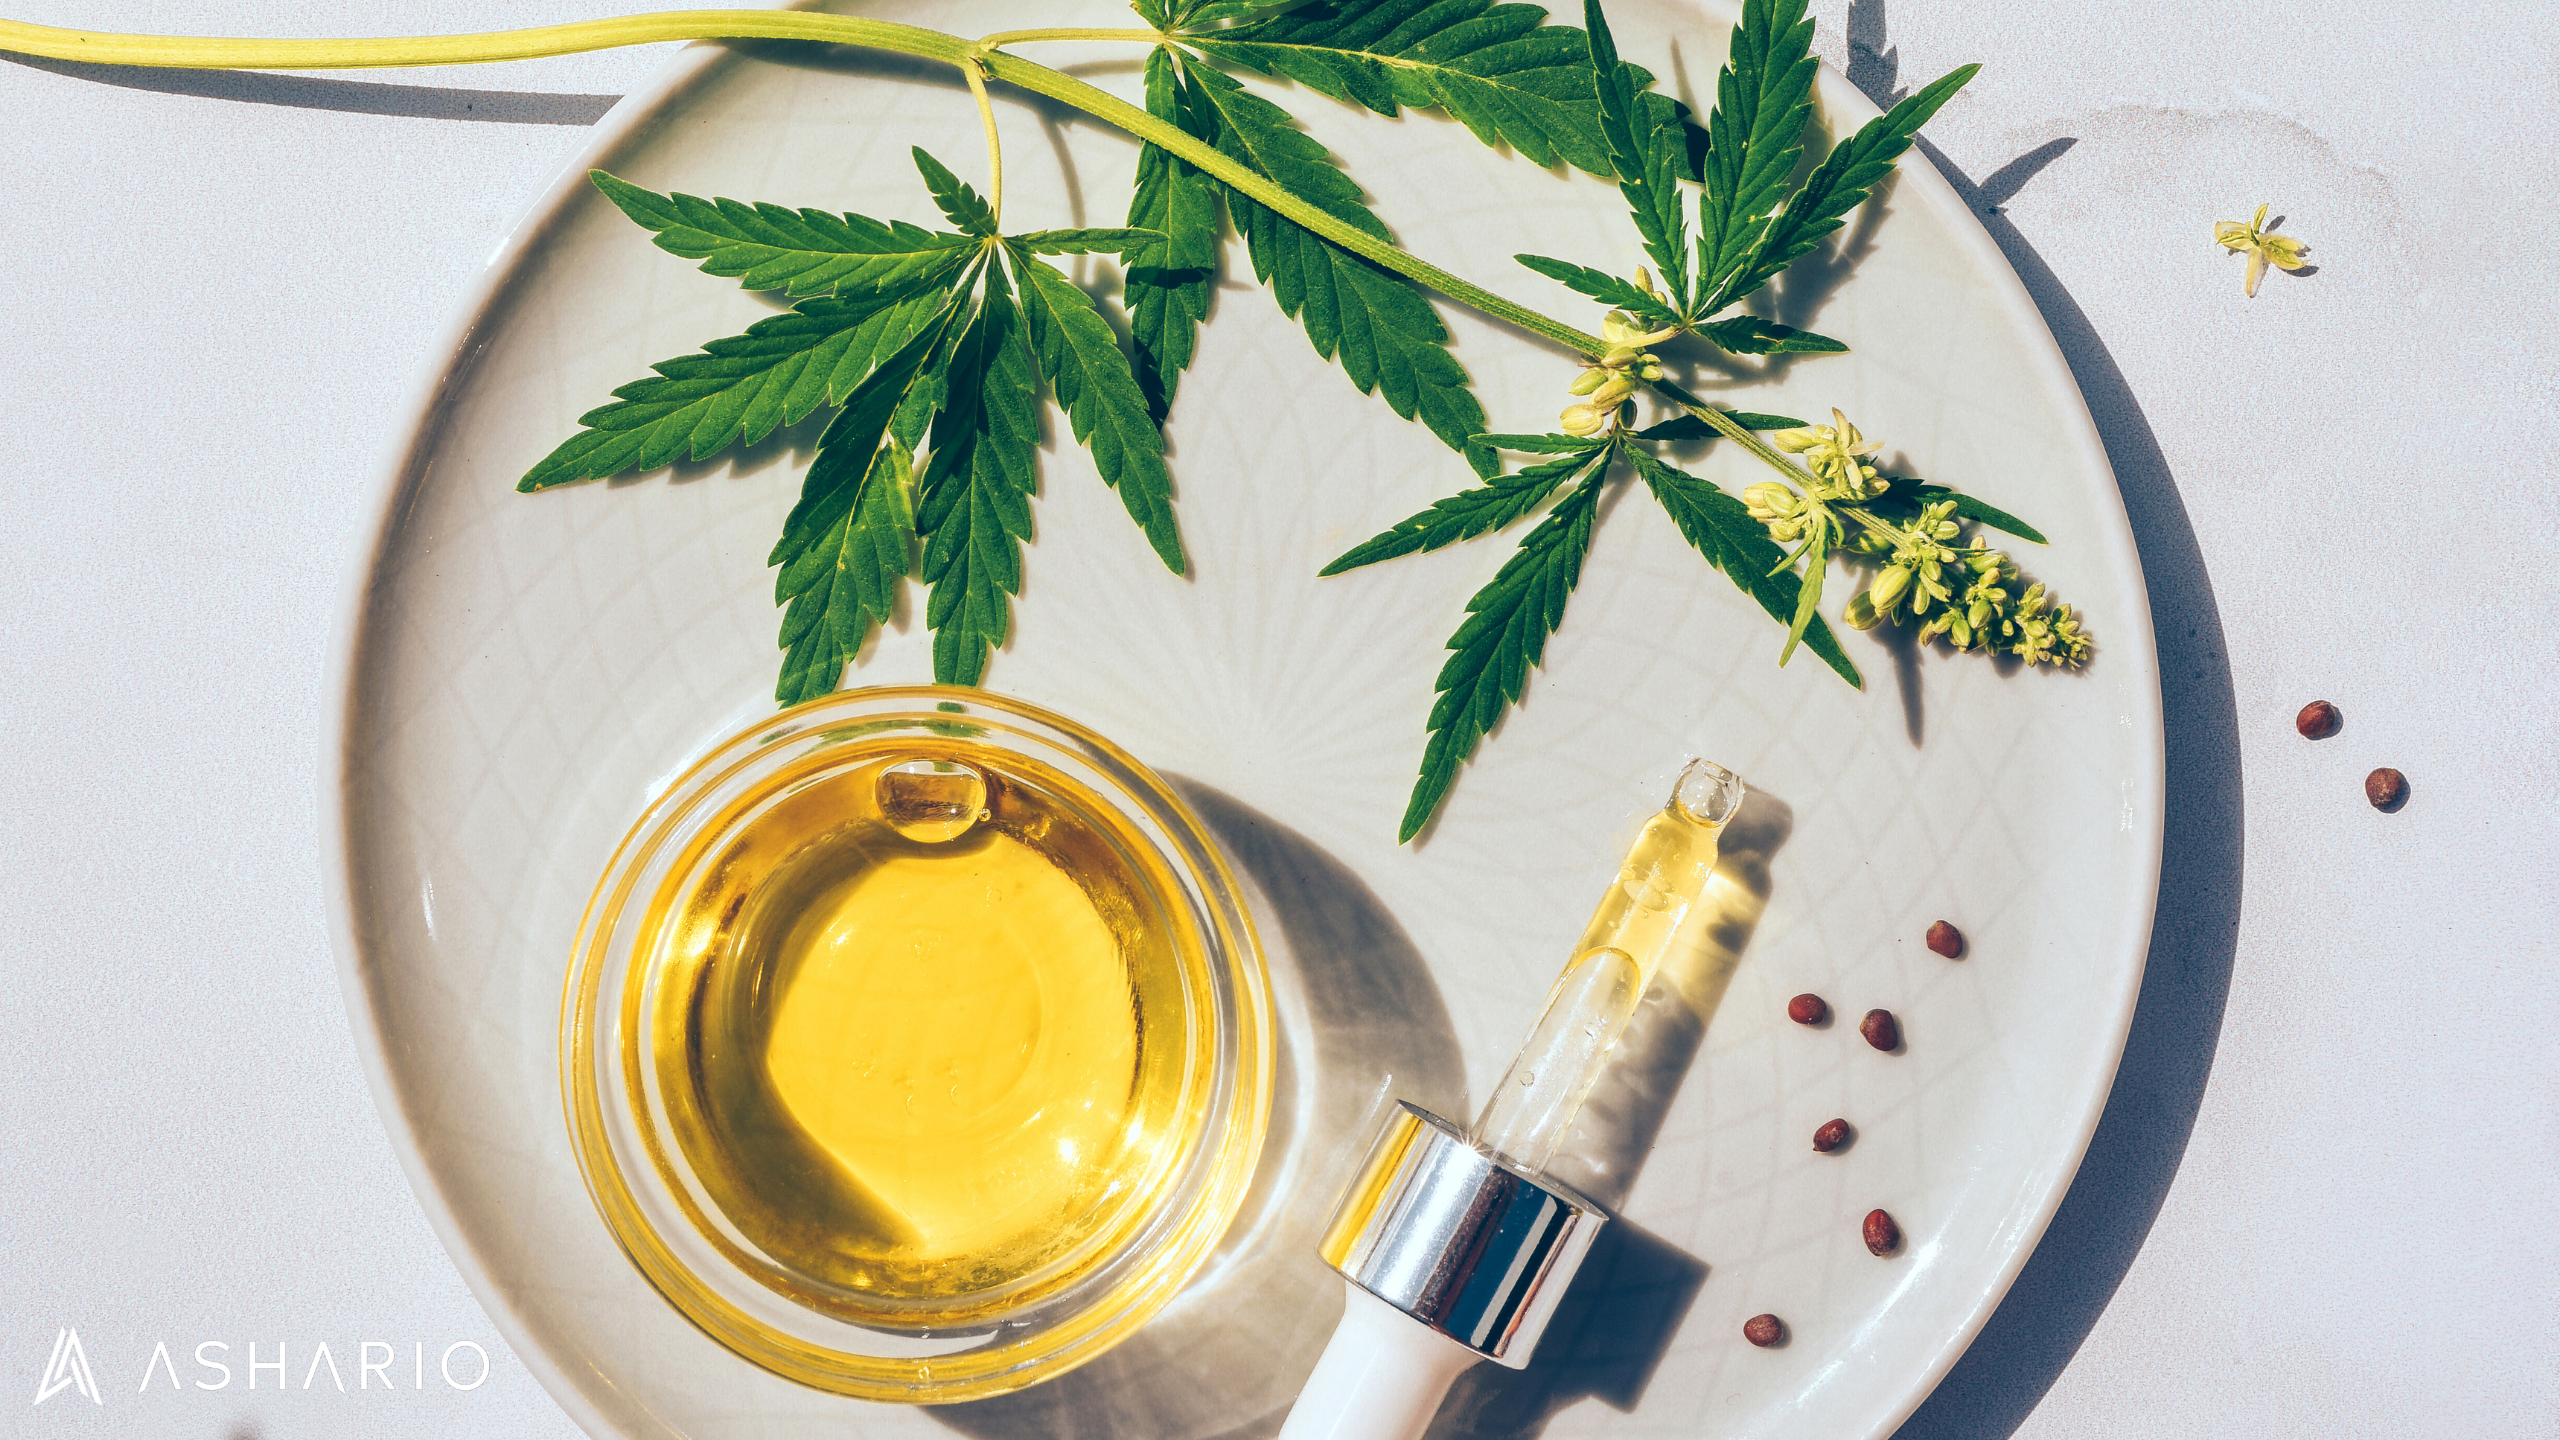 Embark on a journey into the world of CBD extraction and uncover the scientific benefits of consuming CBD products. 